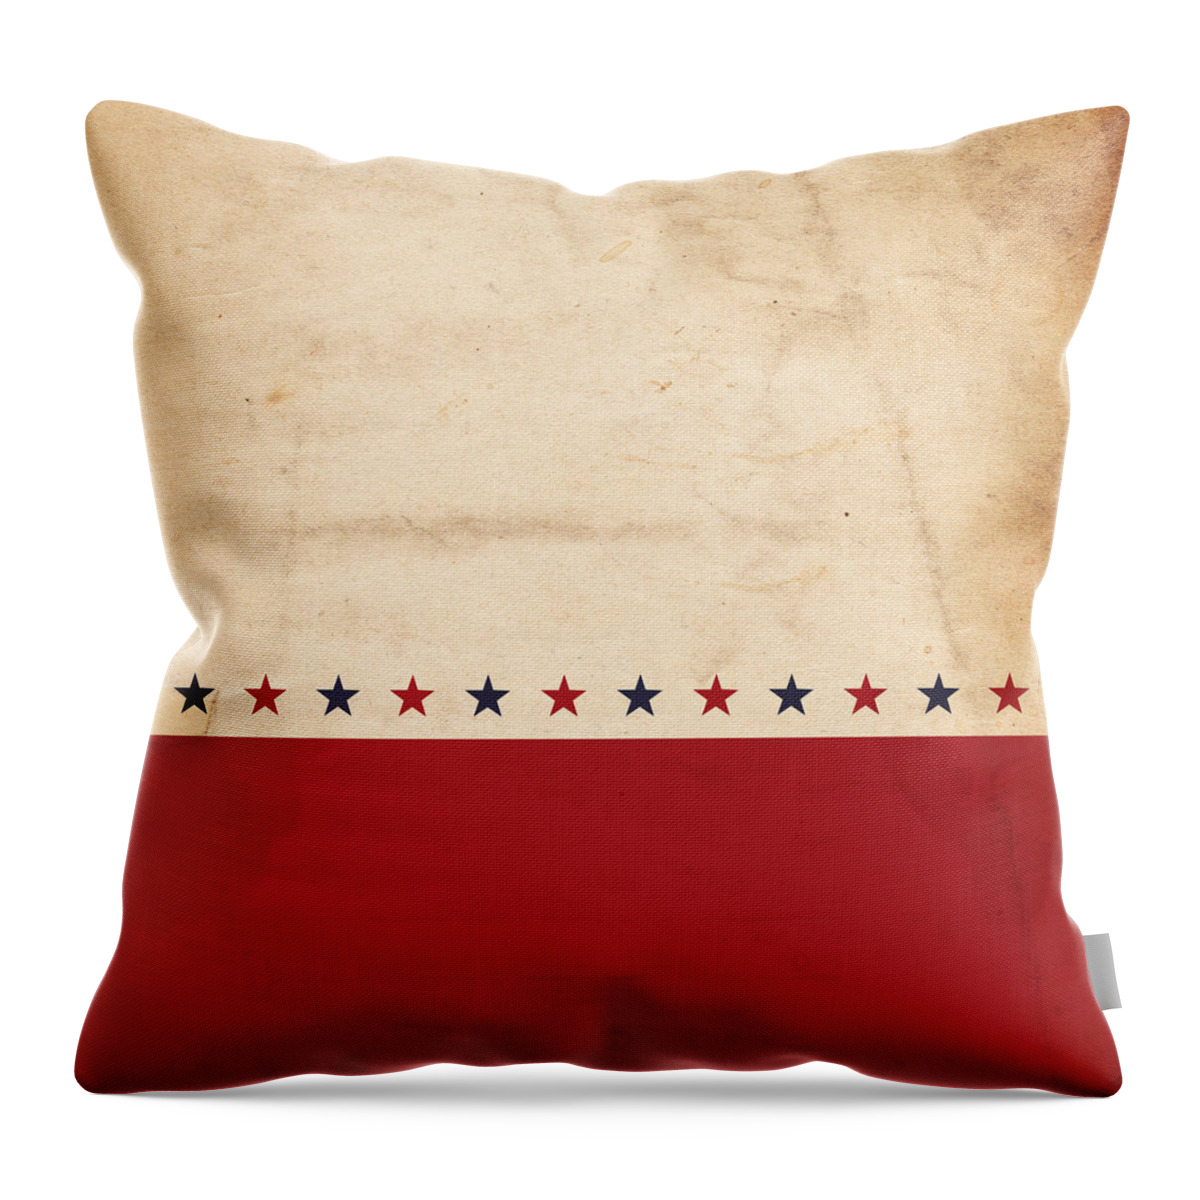 Holiday Throw Pillow featuring the photograph A Patriotic, Vintage Design With Stars by Nic taylor